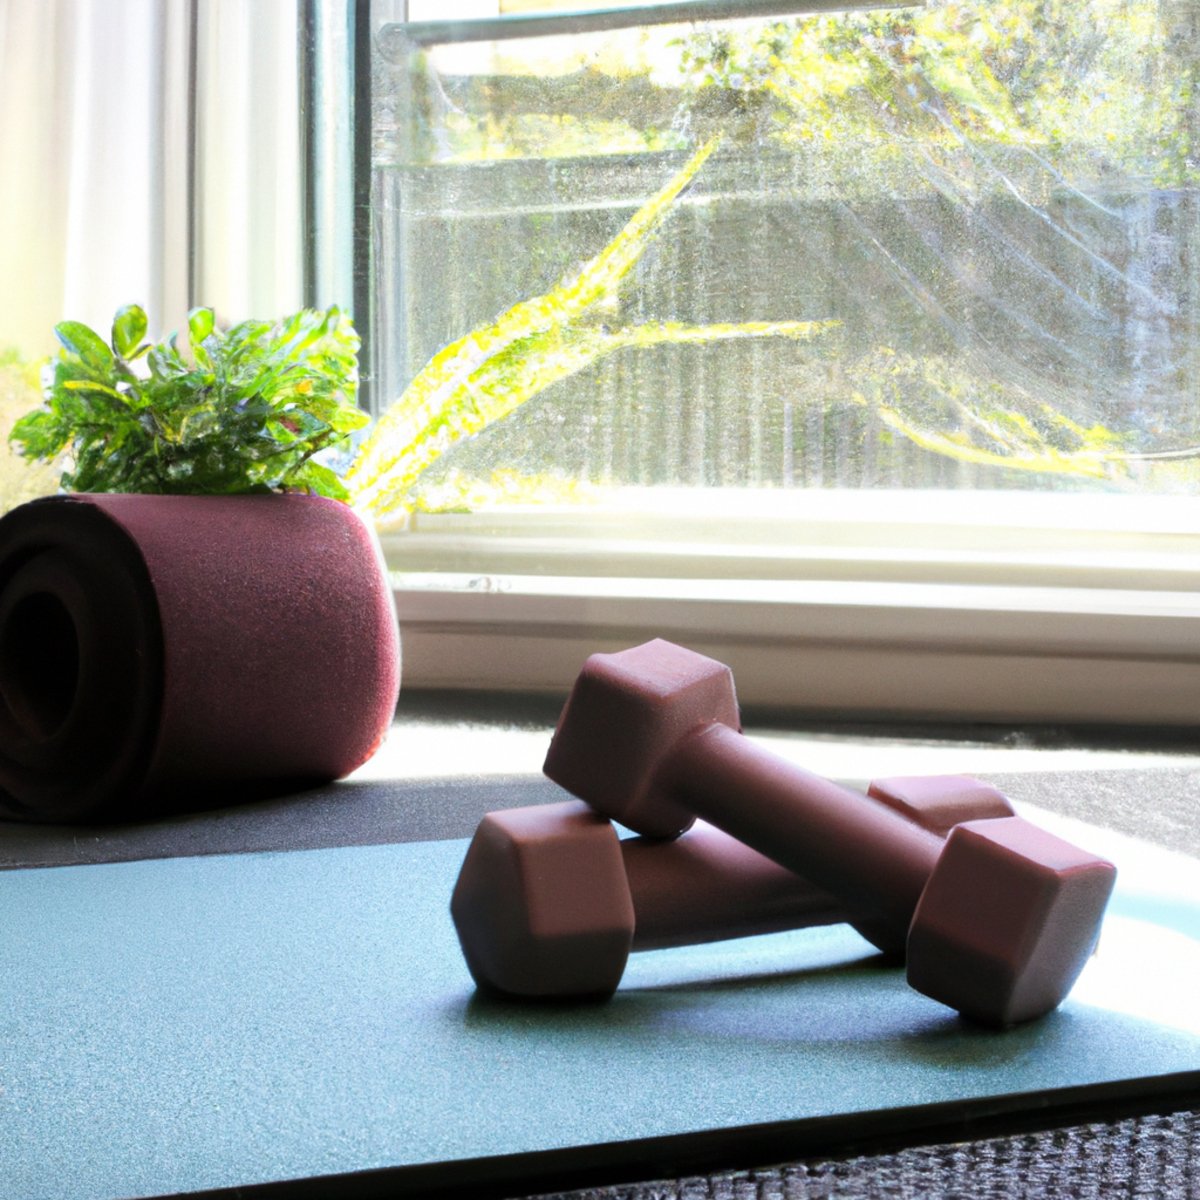 The photo features a yoga mat spread out on the floor with a pair of dumbbells resting on it. In the background, a small plant sits on a windowsill, adding a touch of greenery to the scene. A meditation cushion is placed next to the mat, inviting the viewer to take a moment to center themselves before beginning their workout. The lighting is soft and natural, creating a calming atmosphere that complements the article's focus on incorporating mindfulness into fitness routines.